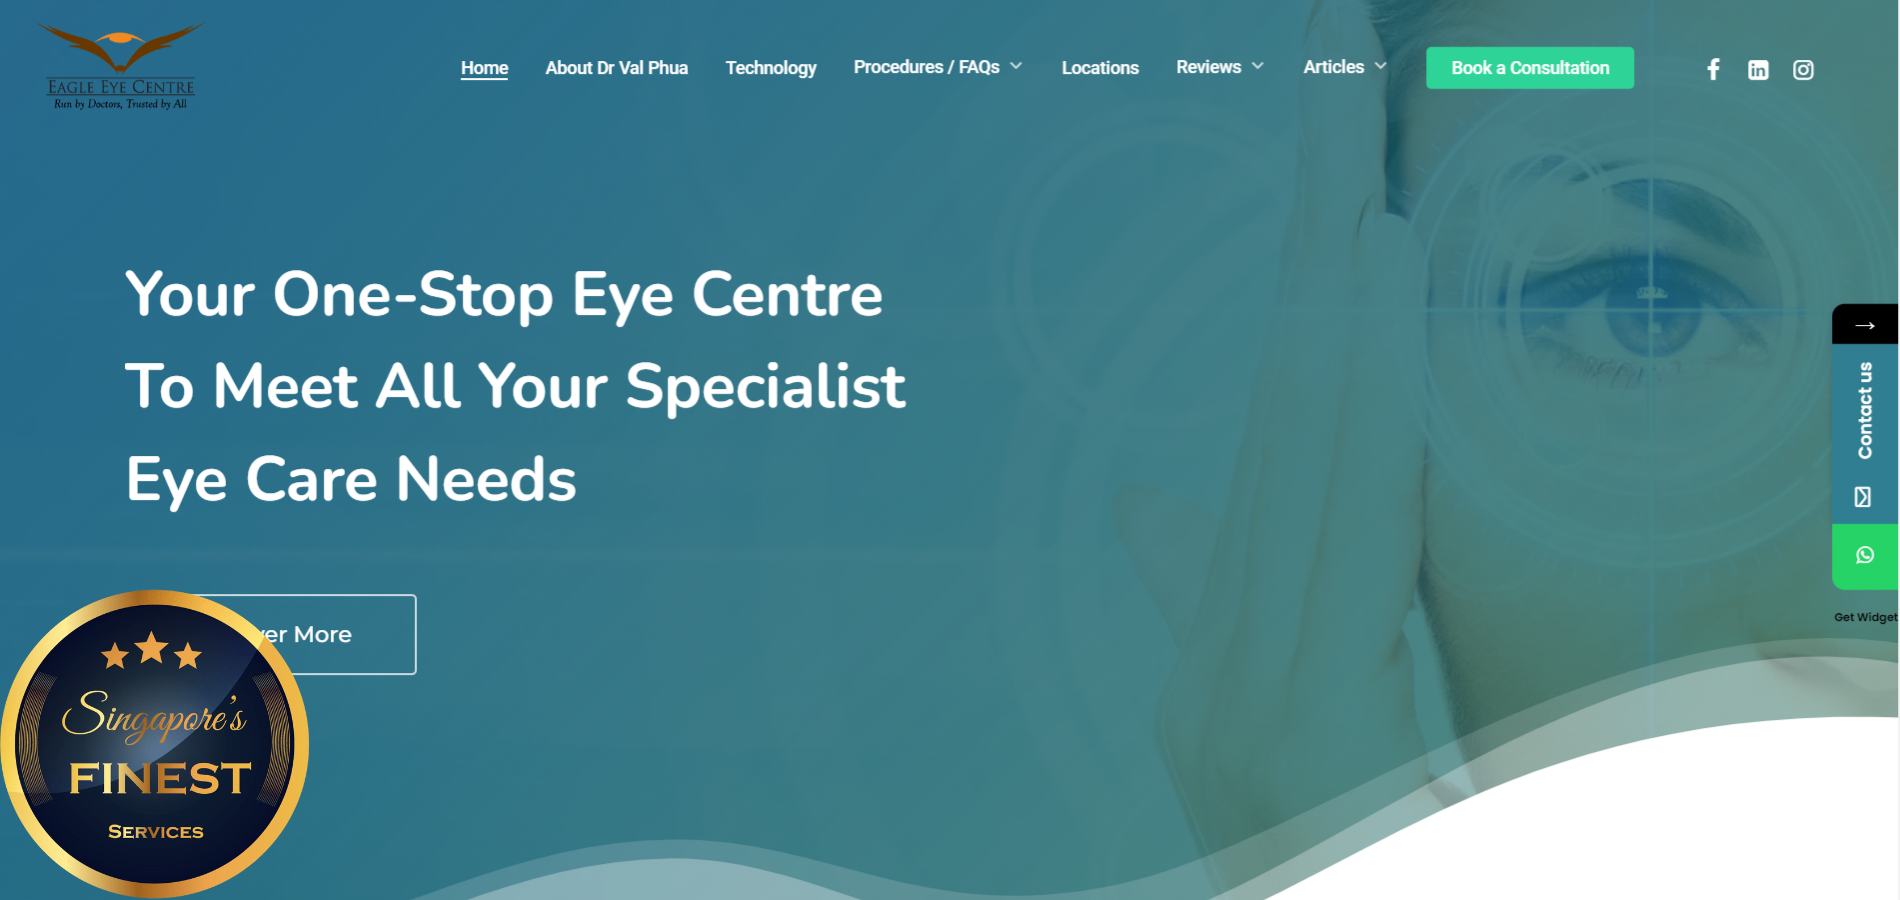 The Finest Vision Therapy Services in Singapore